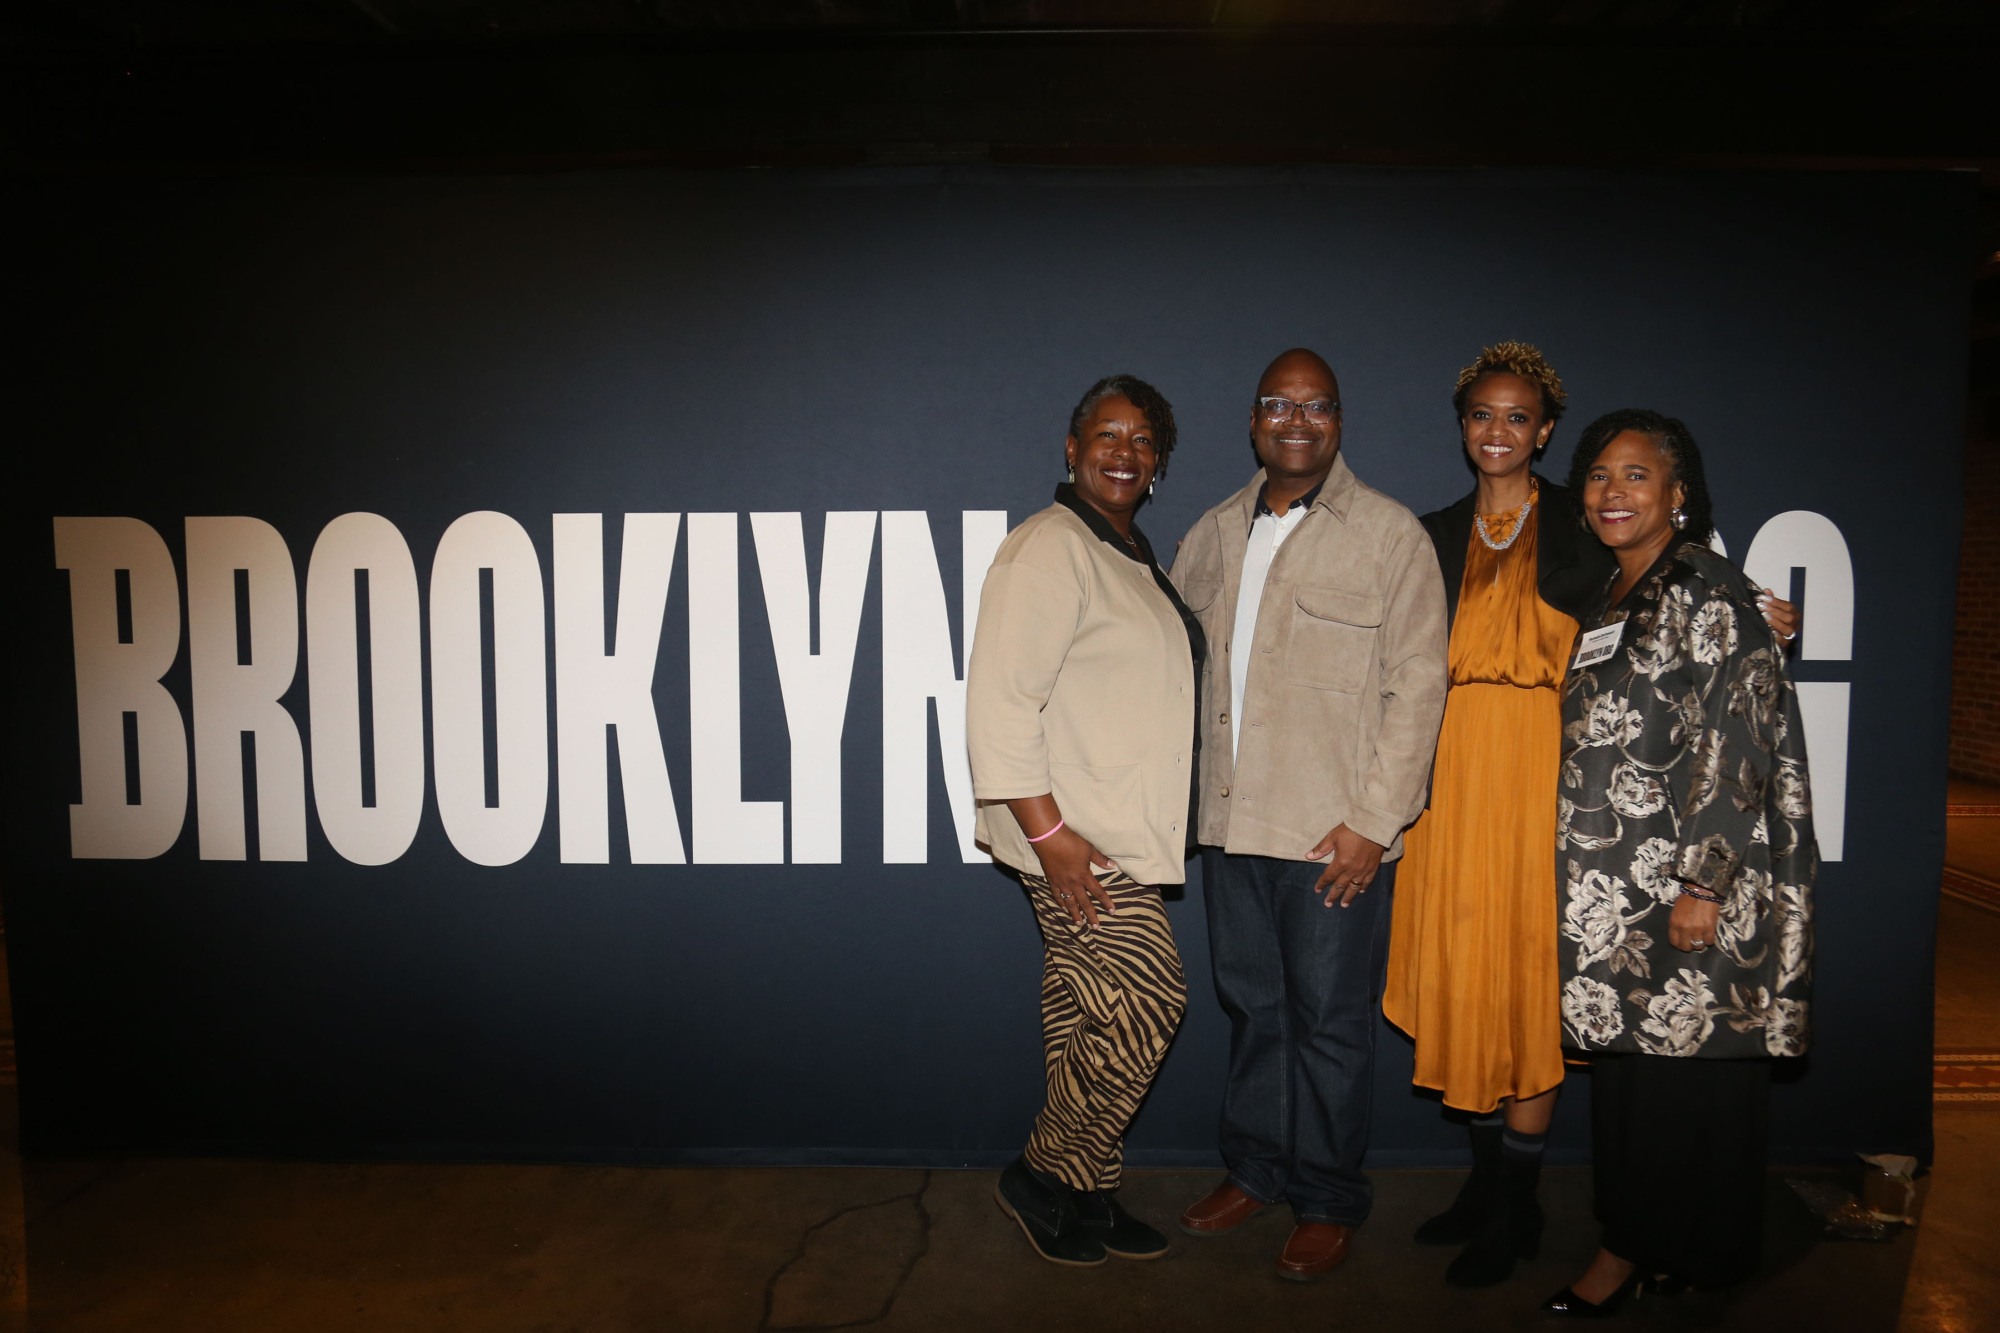 Four people standing in front of a brooklyn sign.